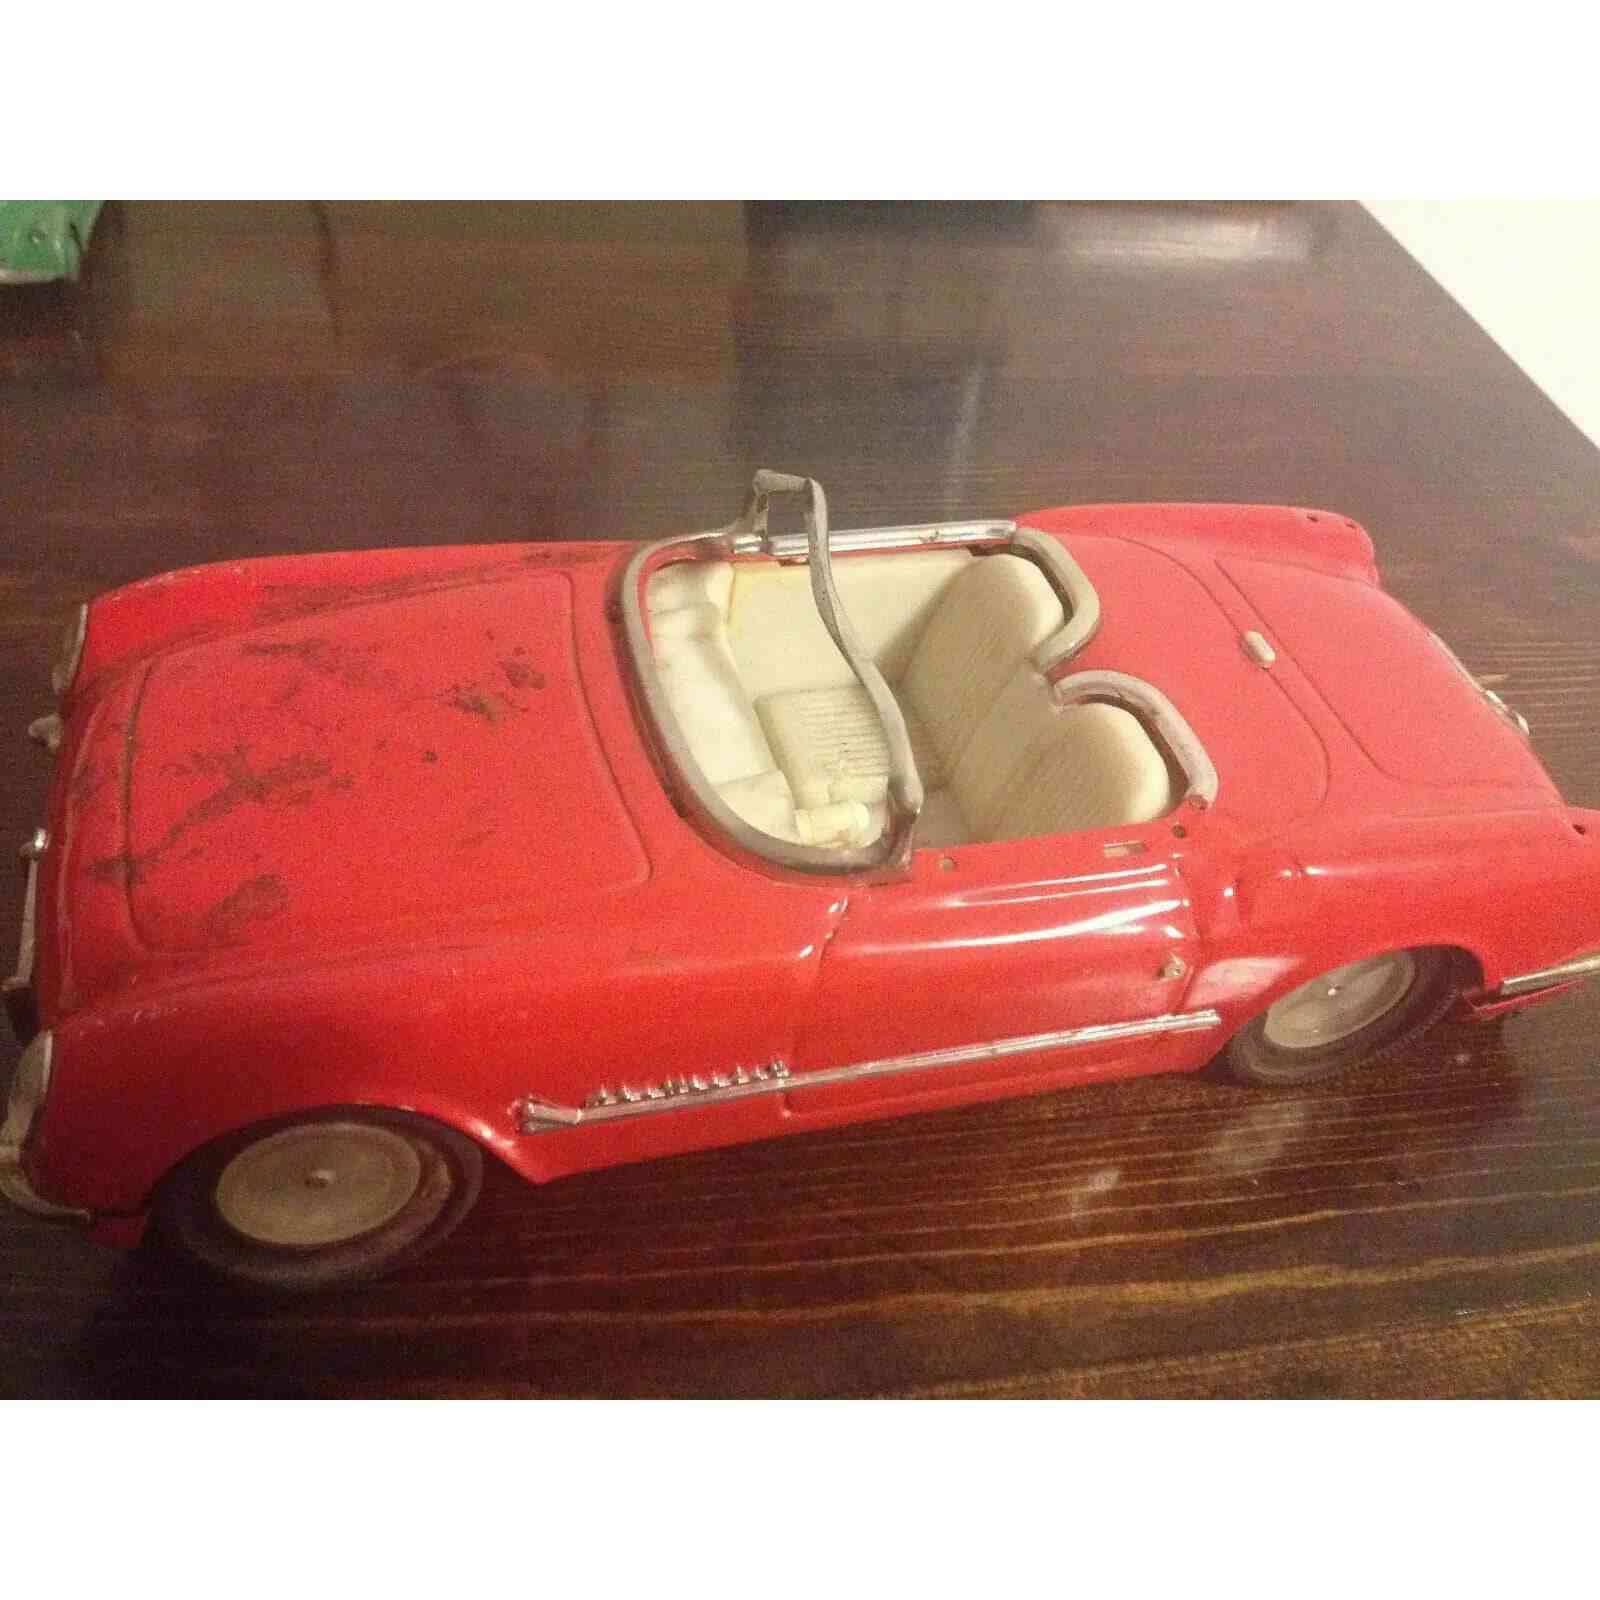 CUSTOM RED CAR!! [ME 317-Toy Cars Here!] - Car Toy